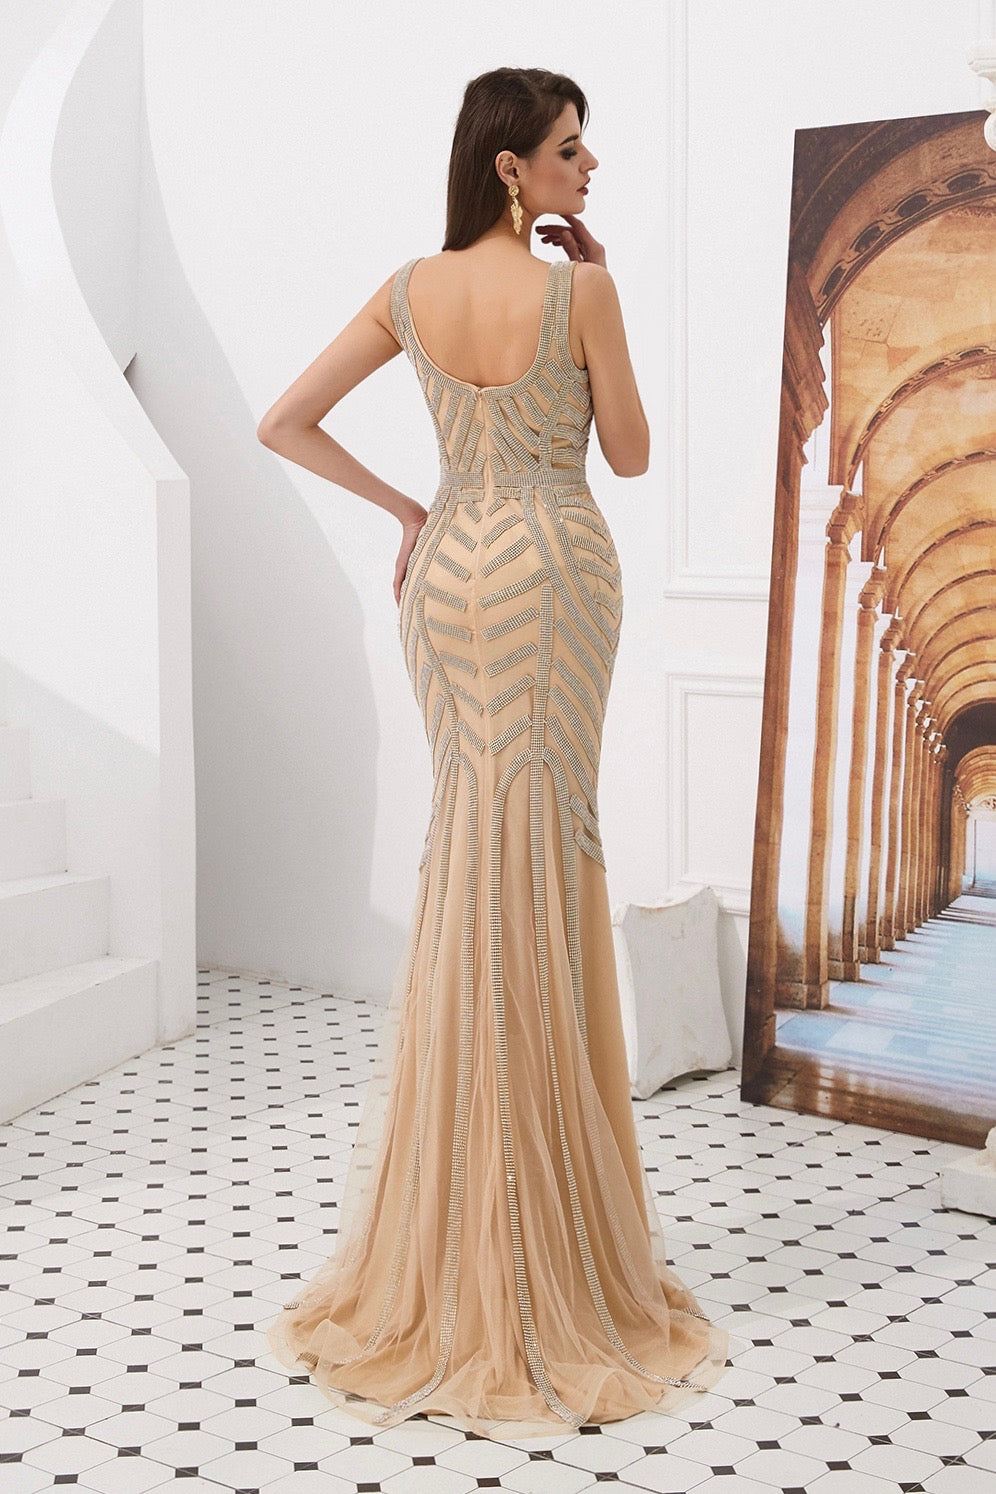 DIAMONDS 2.0 Thick Strap Gold Diamante Sequin Formal Gown Private Label$ AfterPay Humm ZipPay LayBuy Sezzle